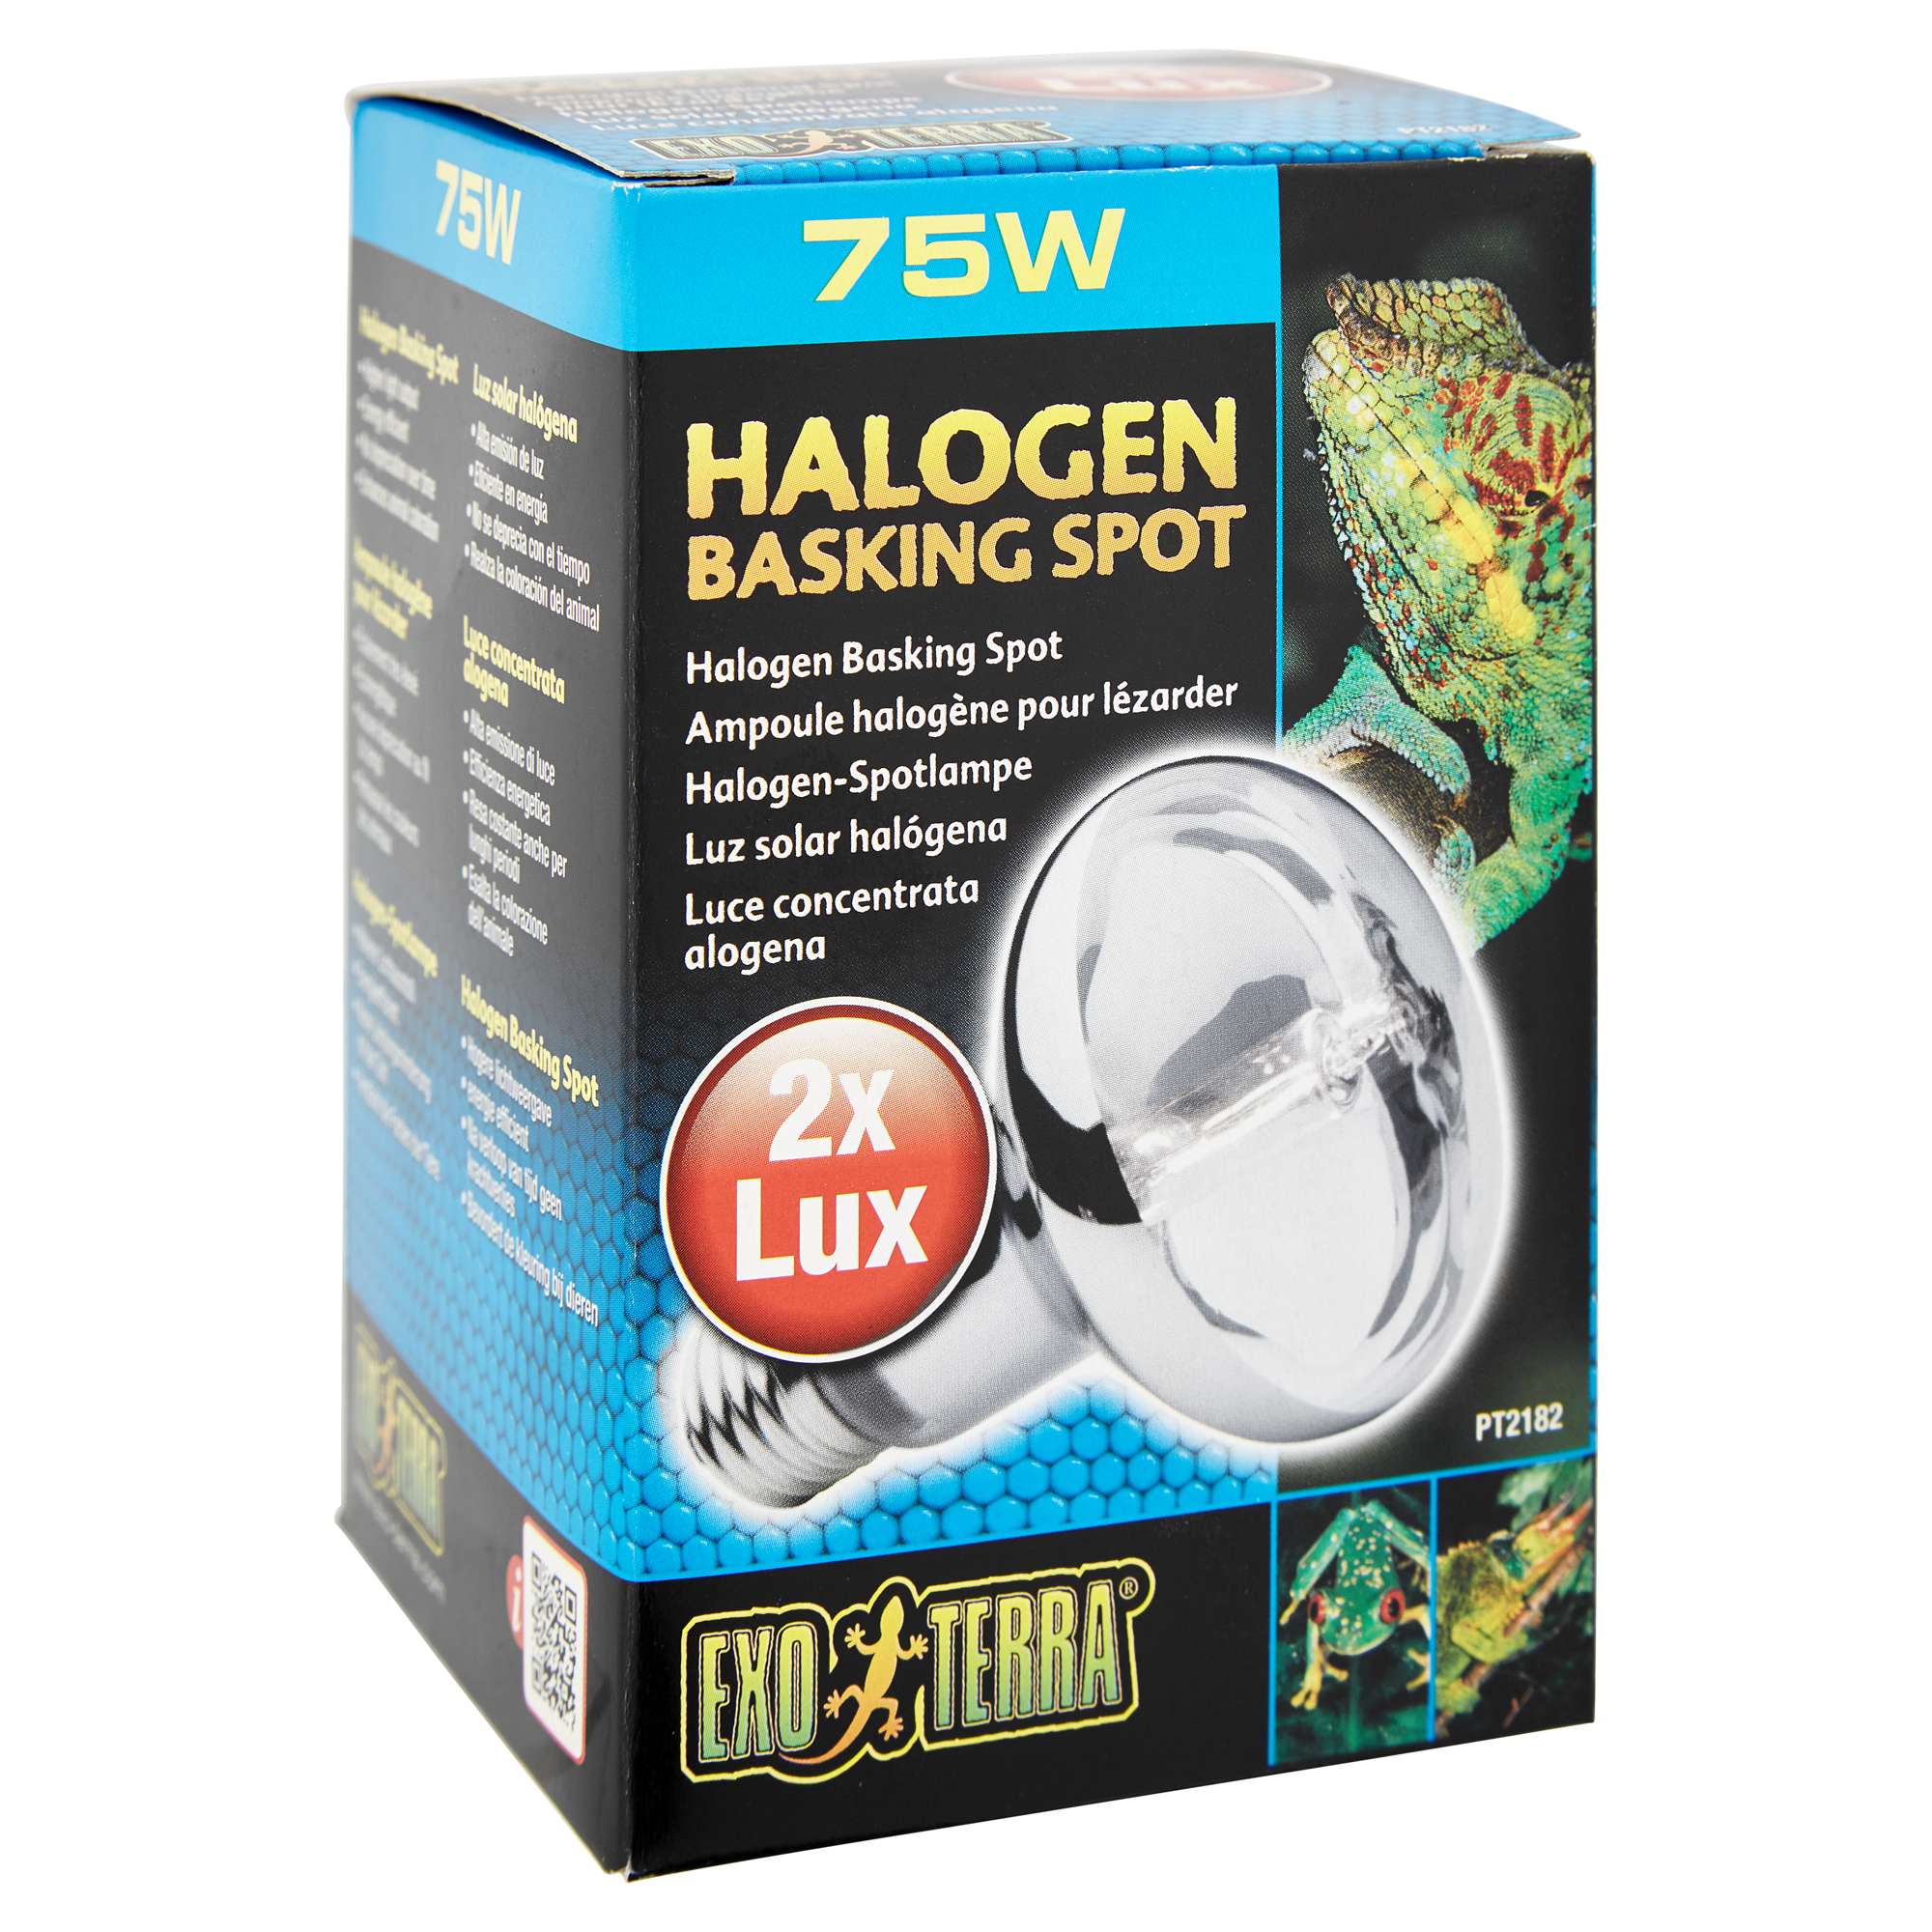 Halogenlampe "Halogen Basking Spot" 75 W + product picture